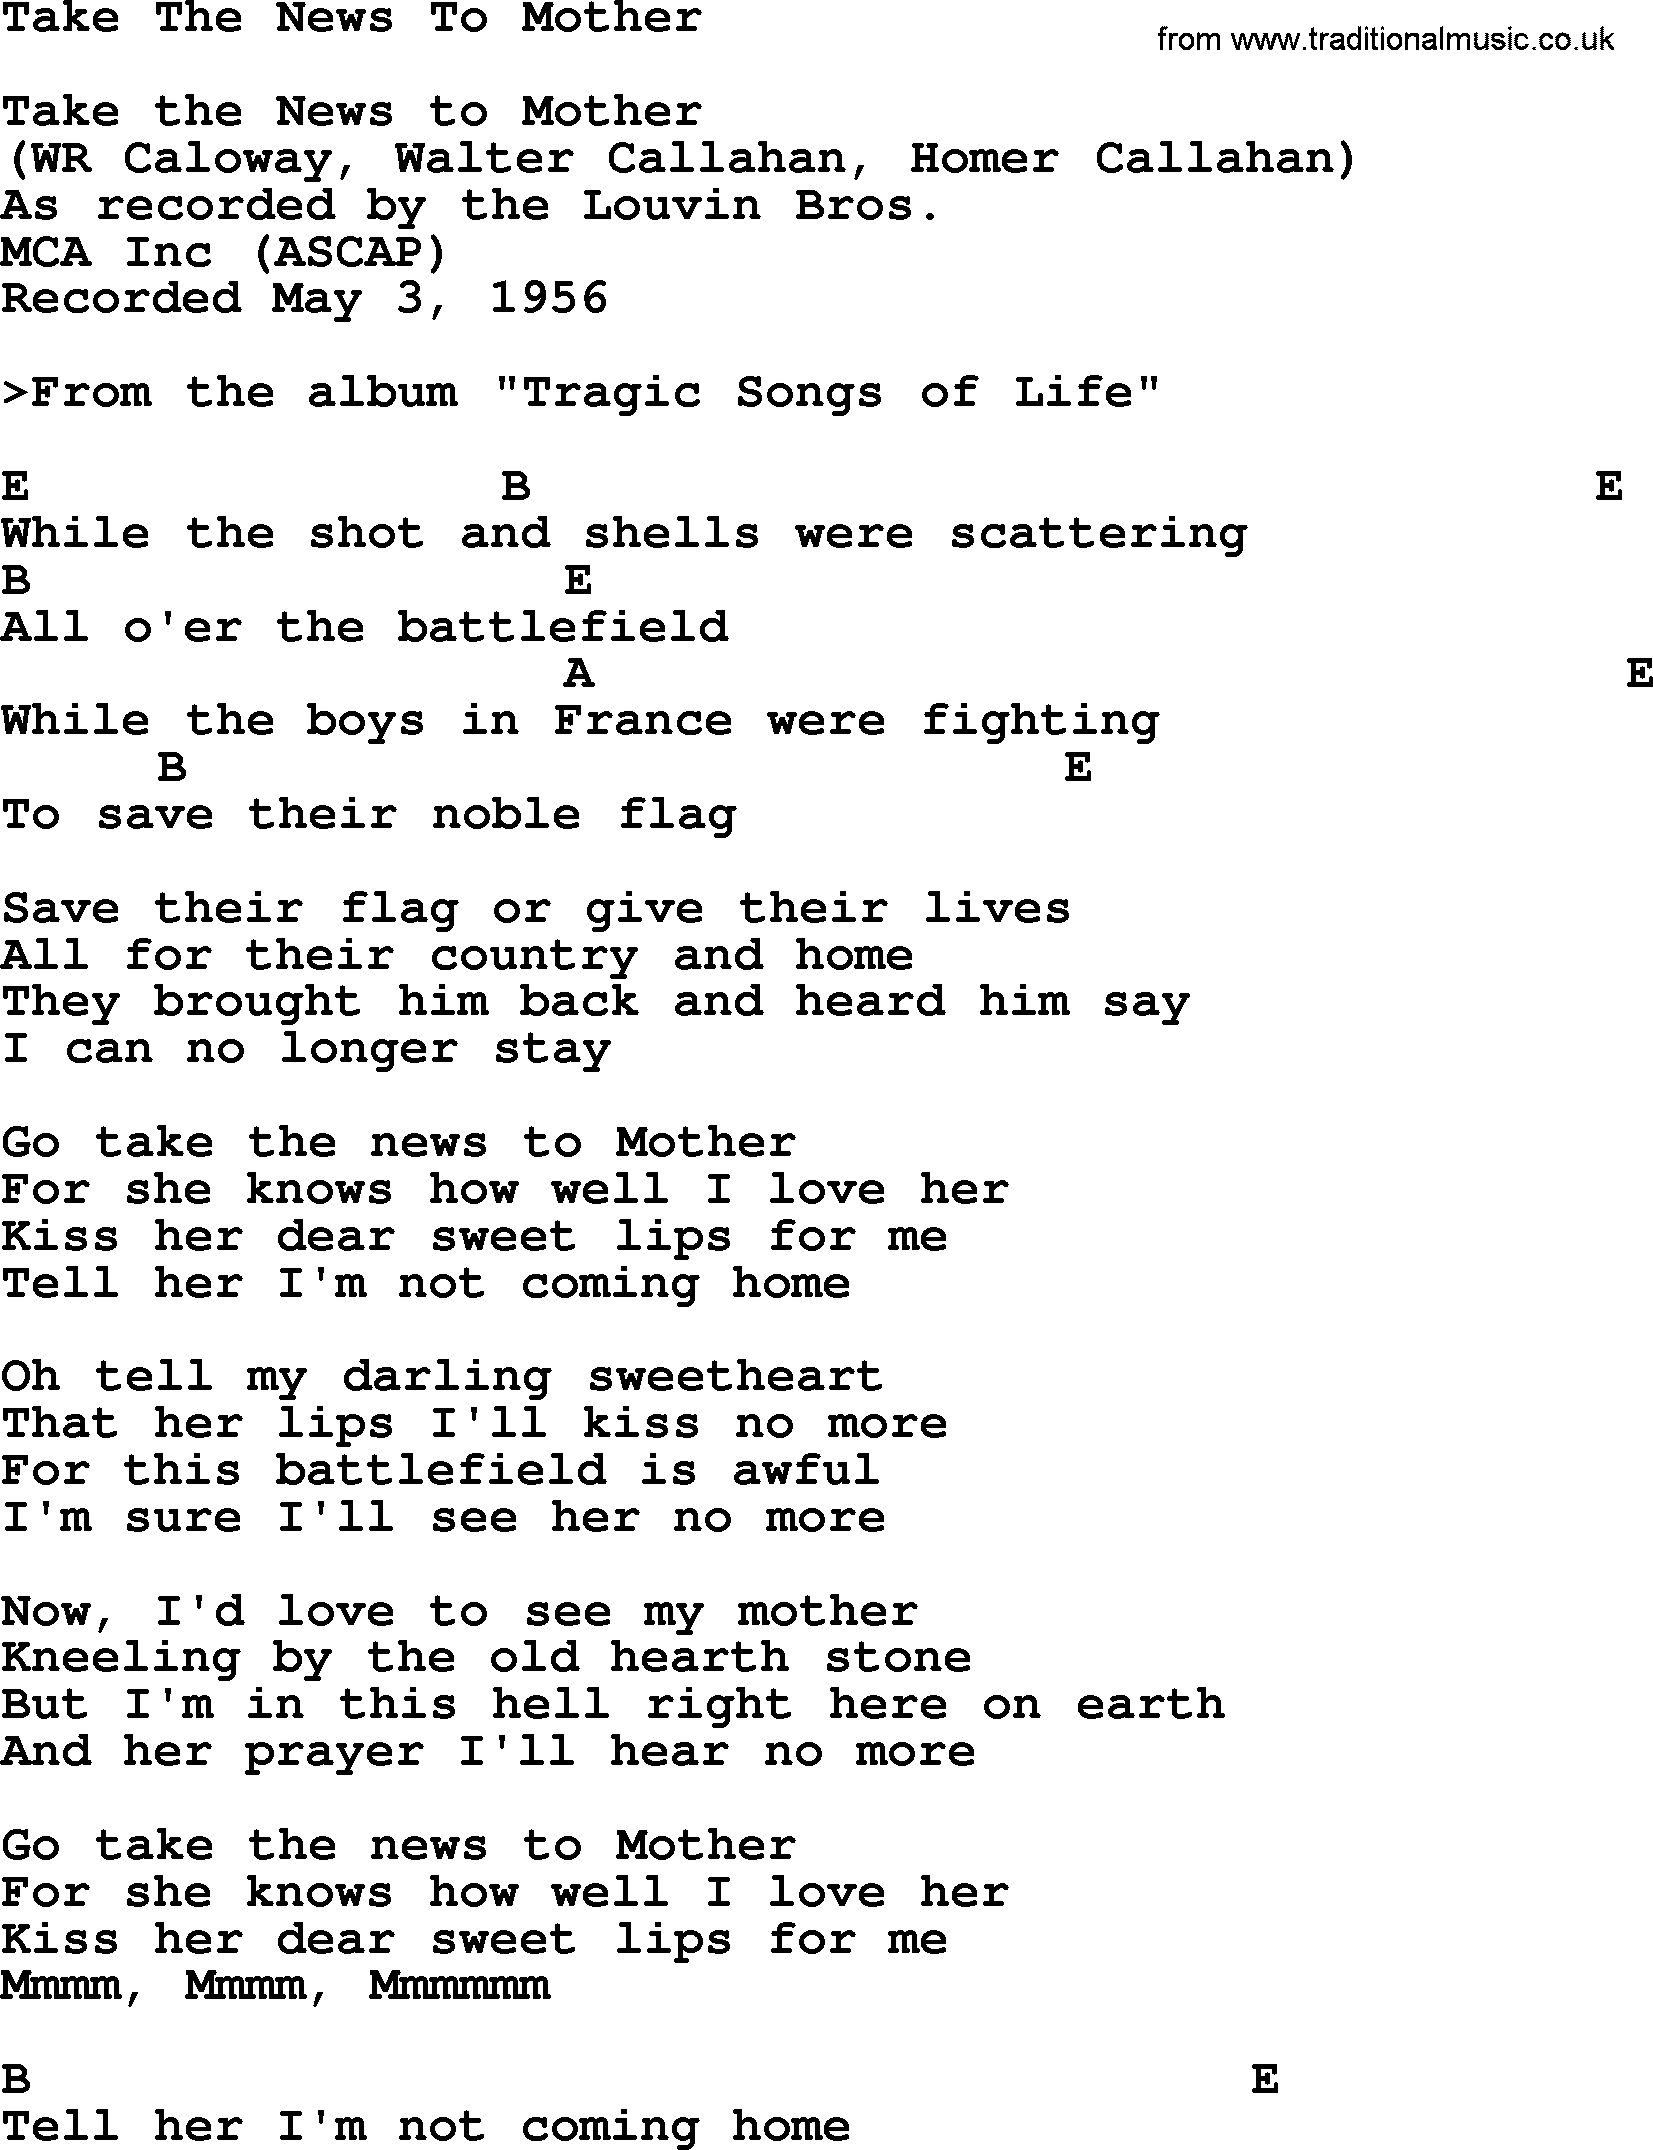 Bluegrass song: Take The News To Mother, lyrics and chords